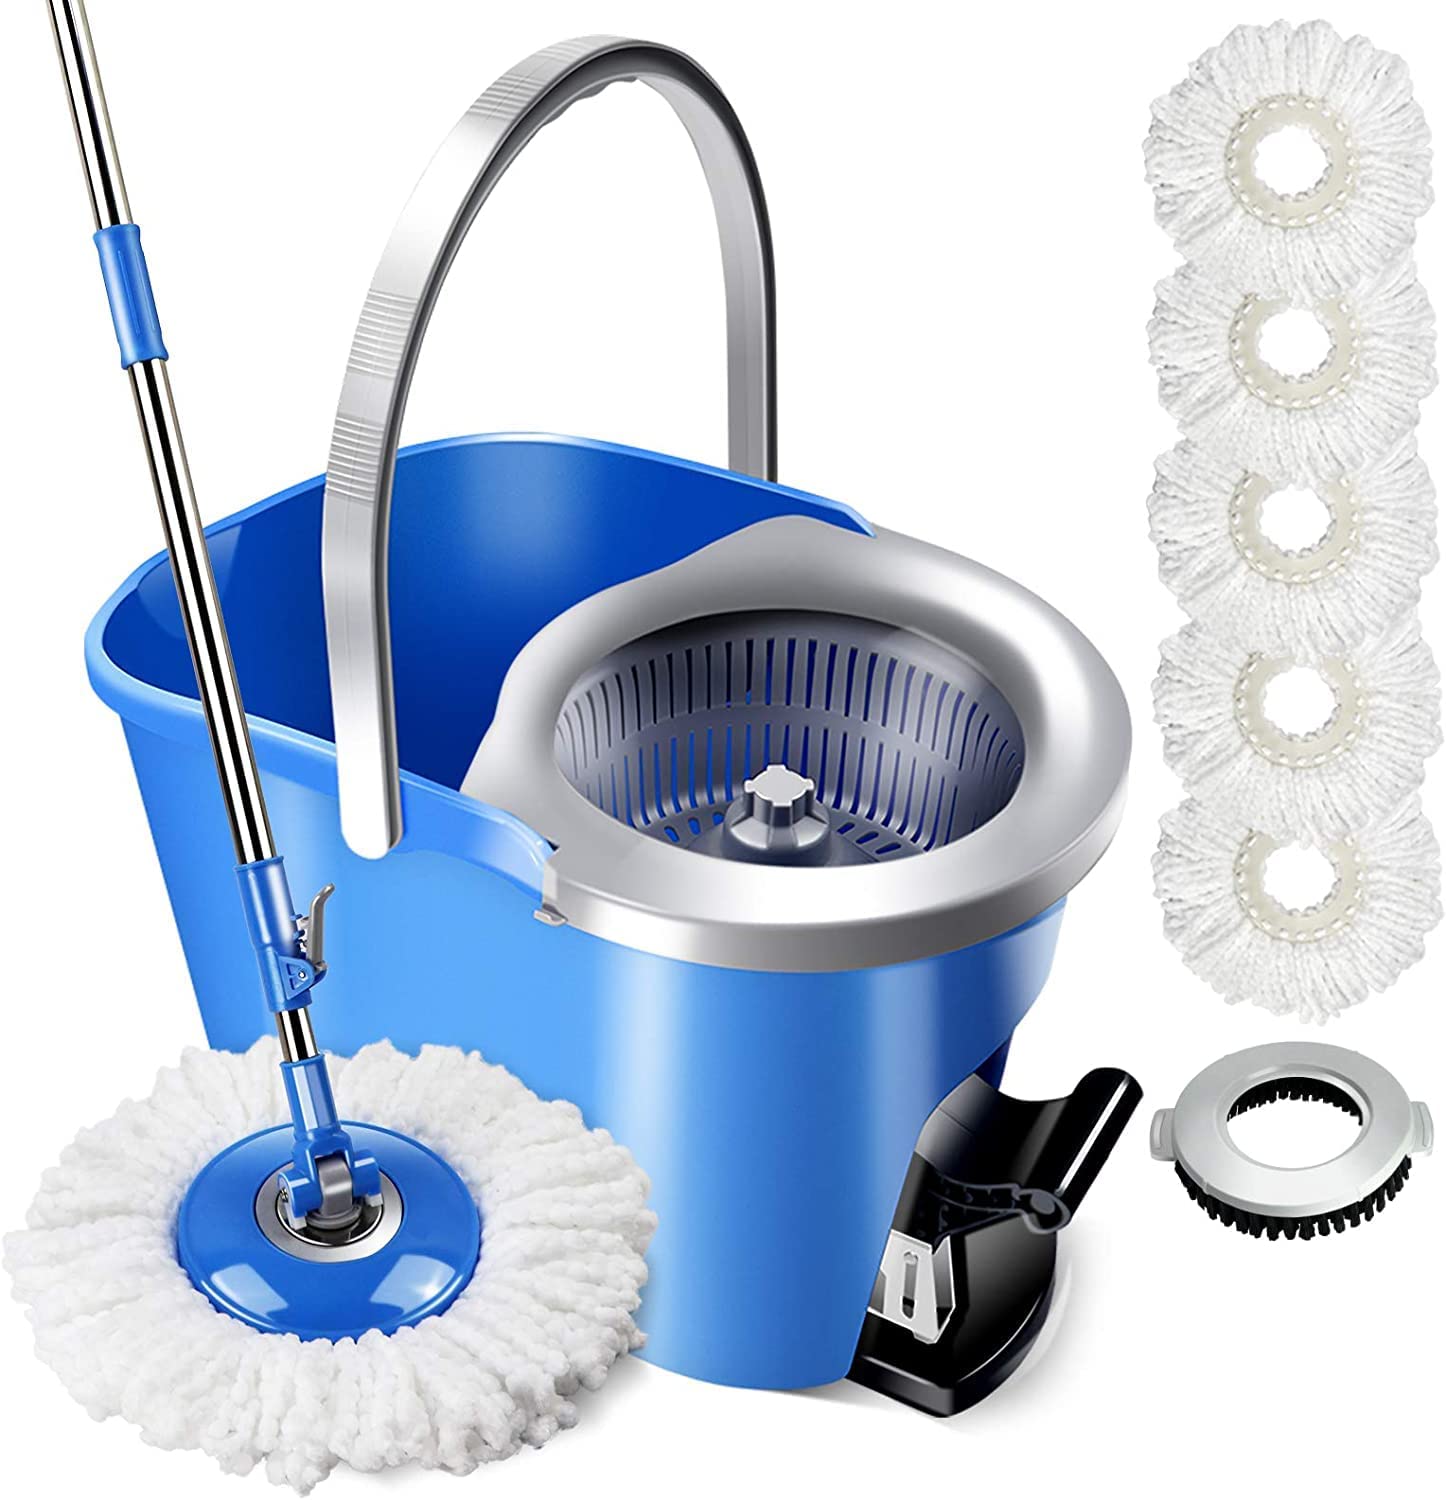 MASTERTOP Spin Mop and Bucket with Wringer Set, Foot [...]